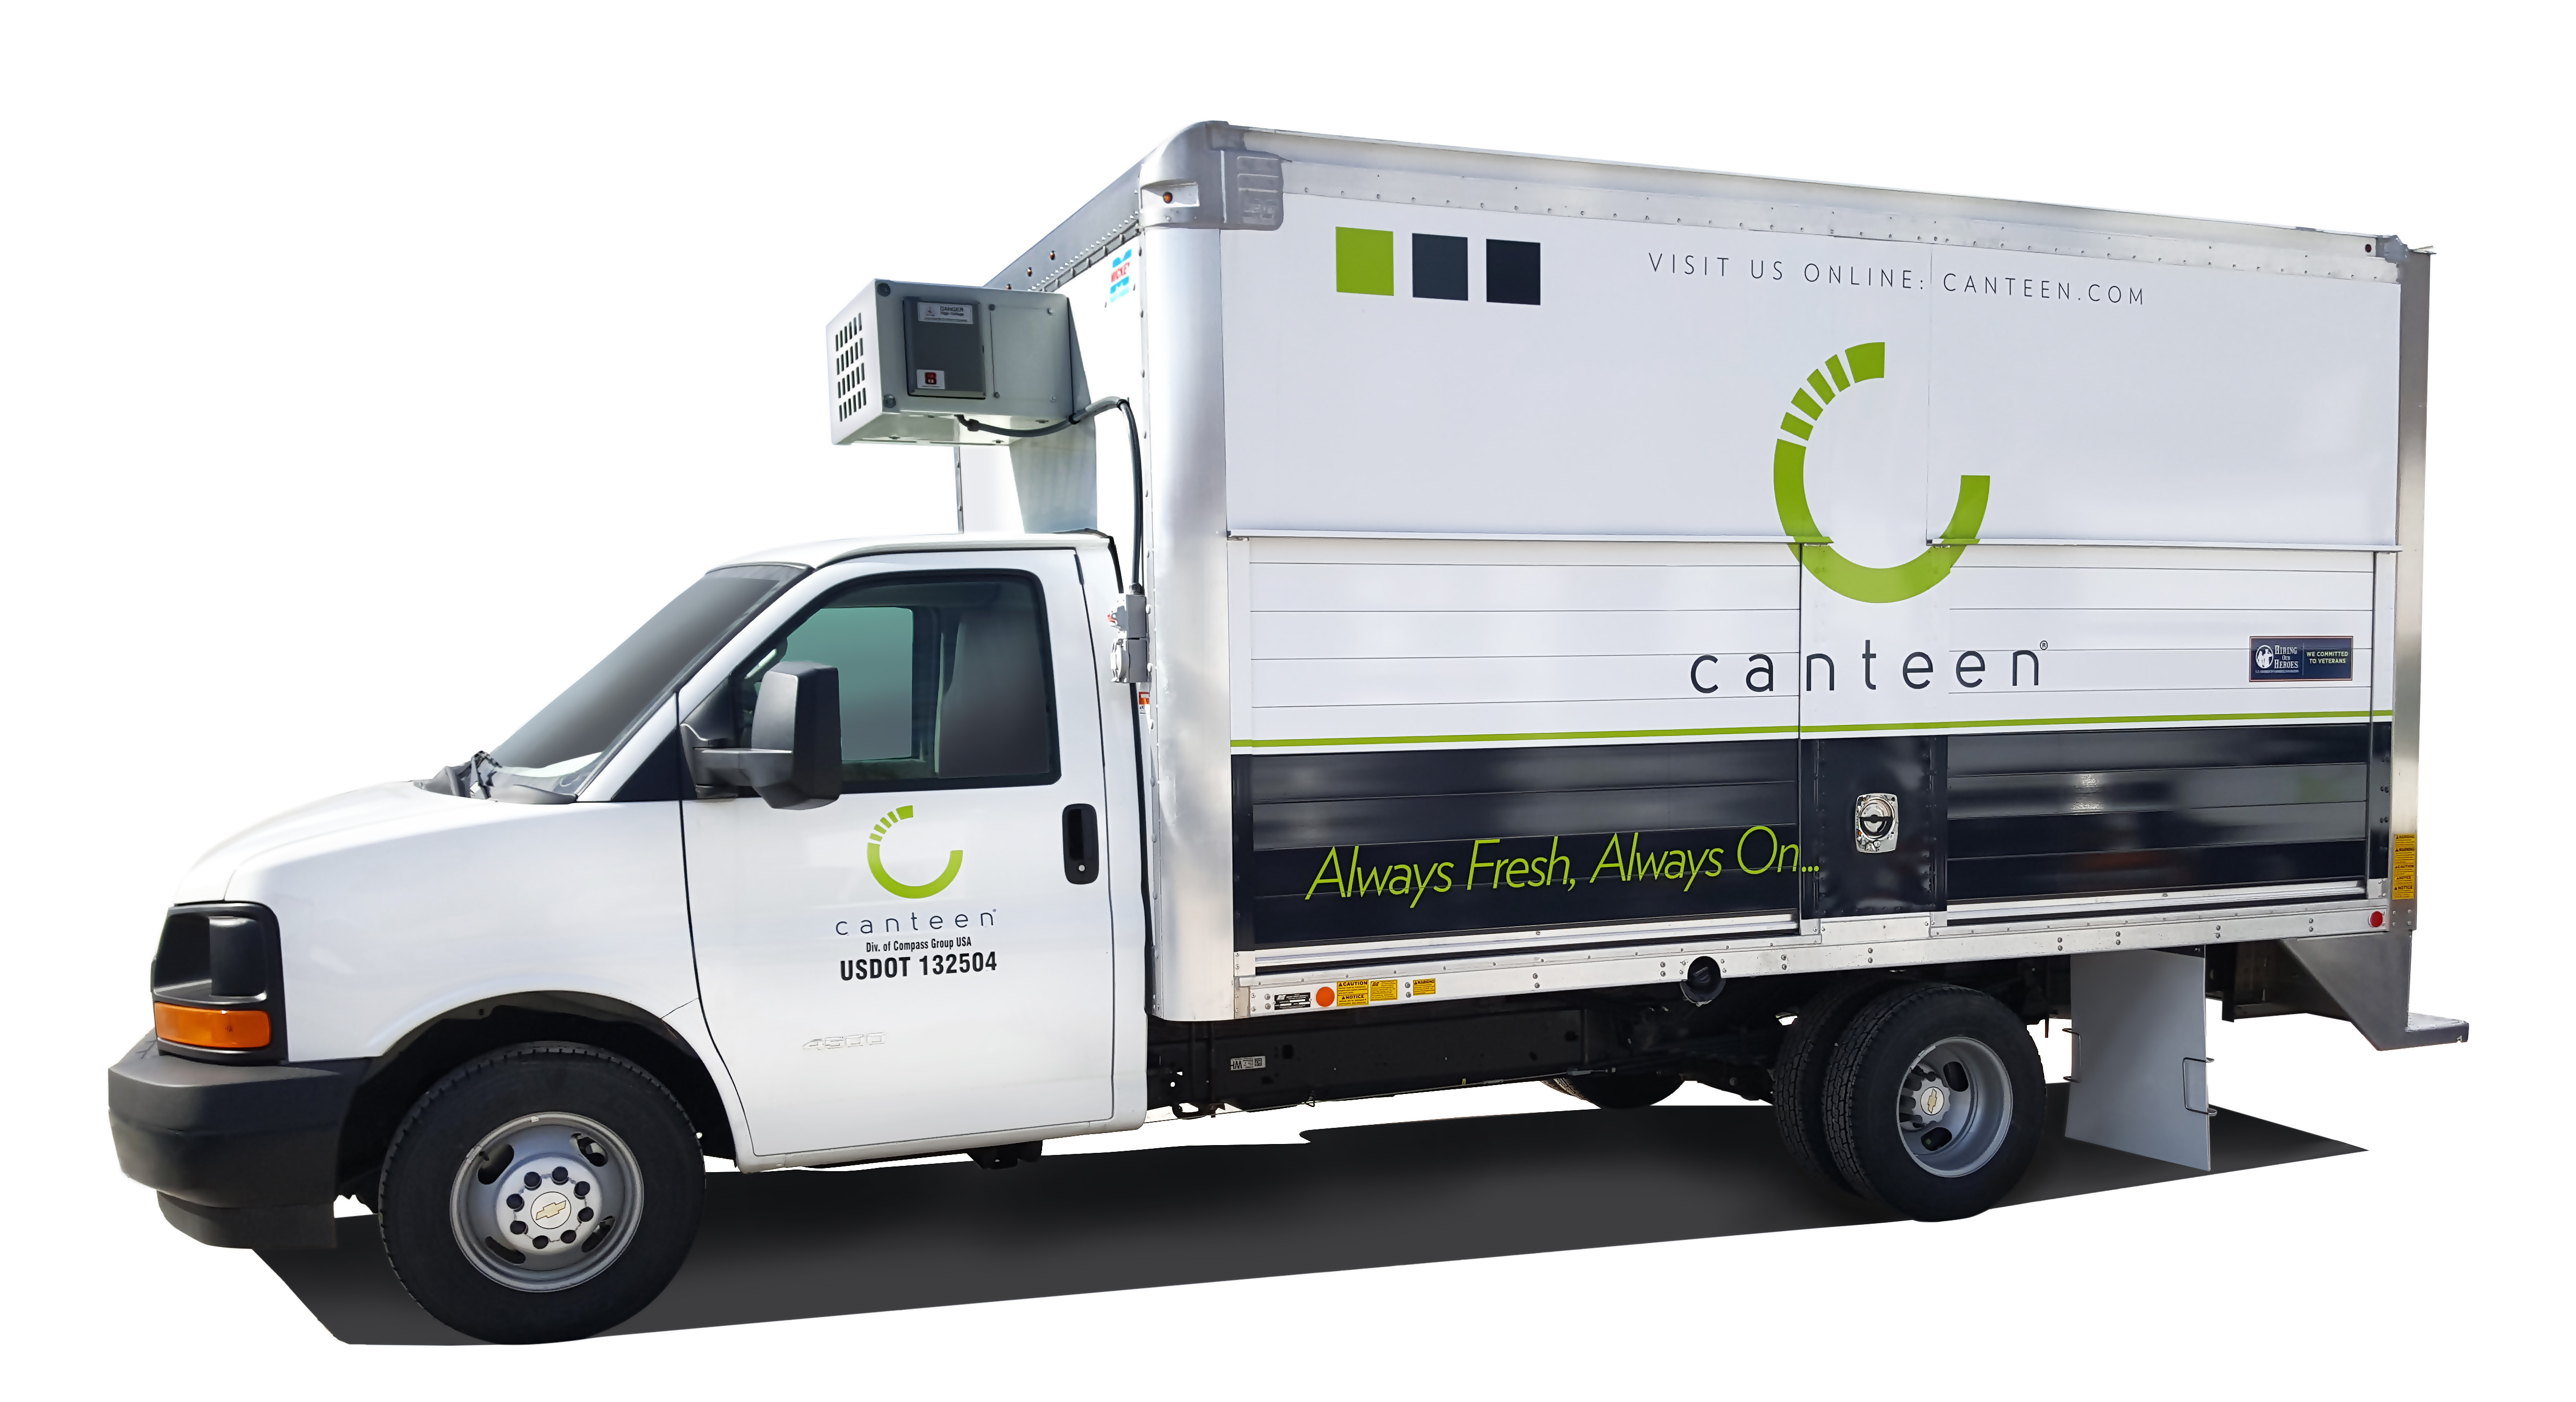 Buy Canteen Custom Trailer & Truck Parts Online | Mickey Parts